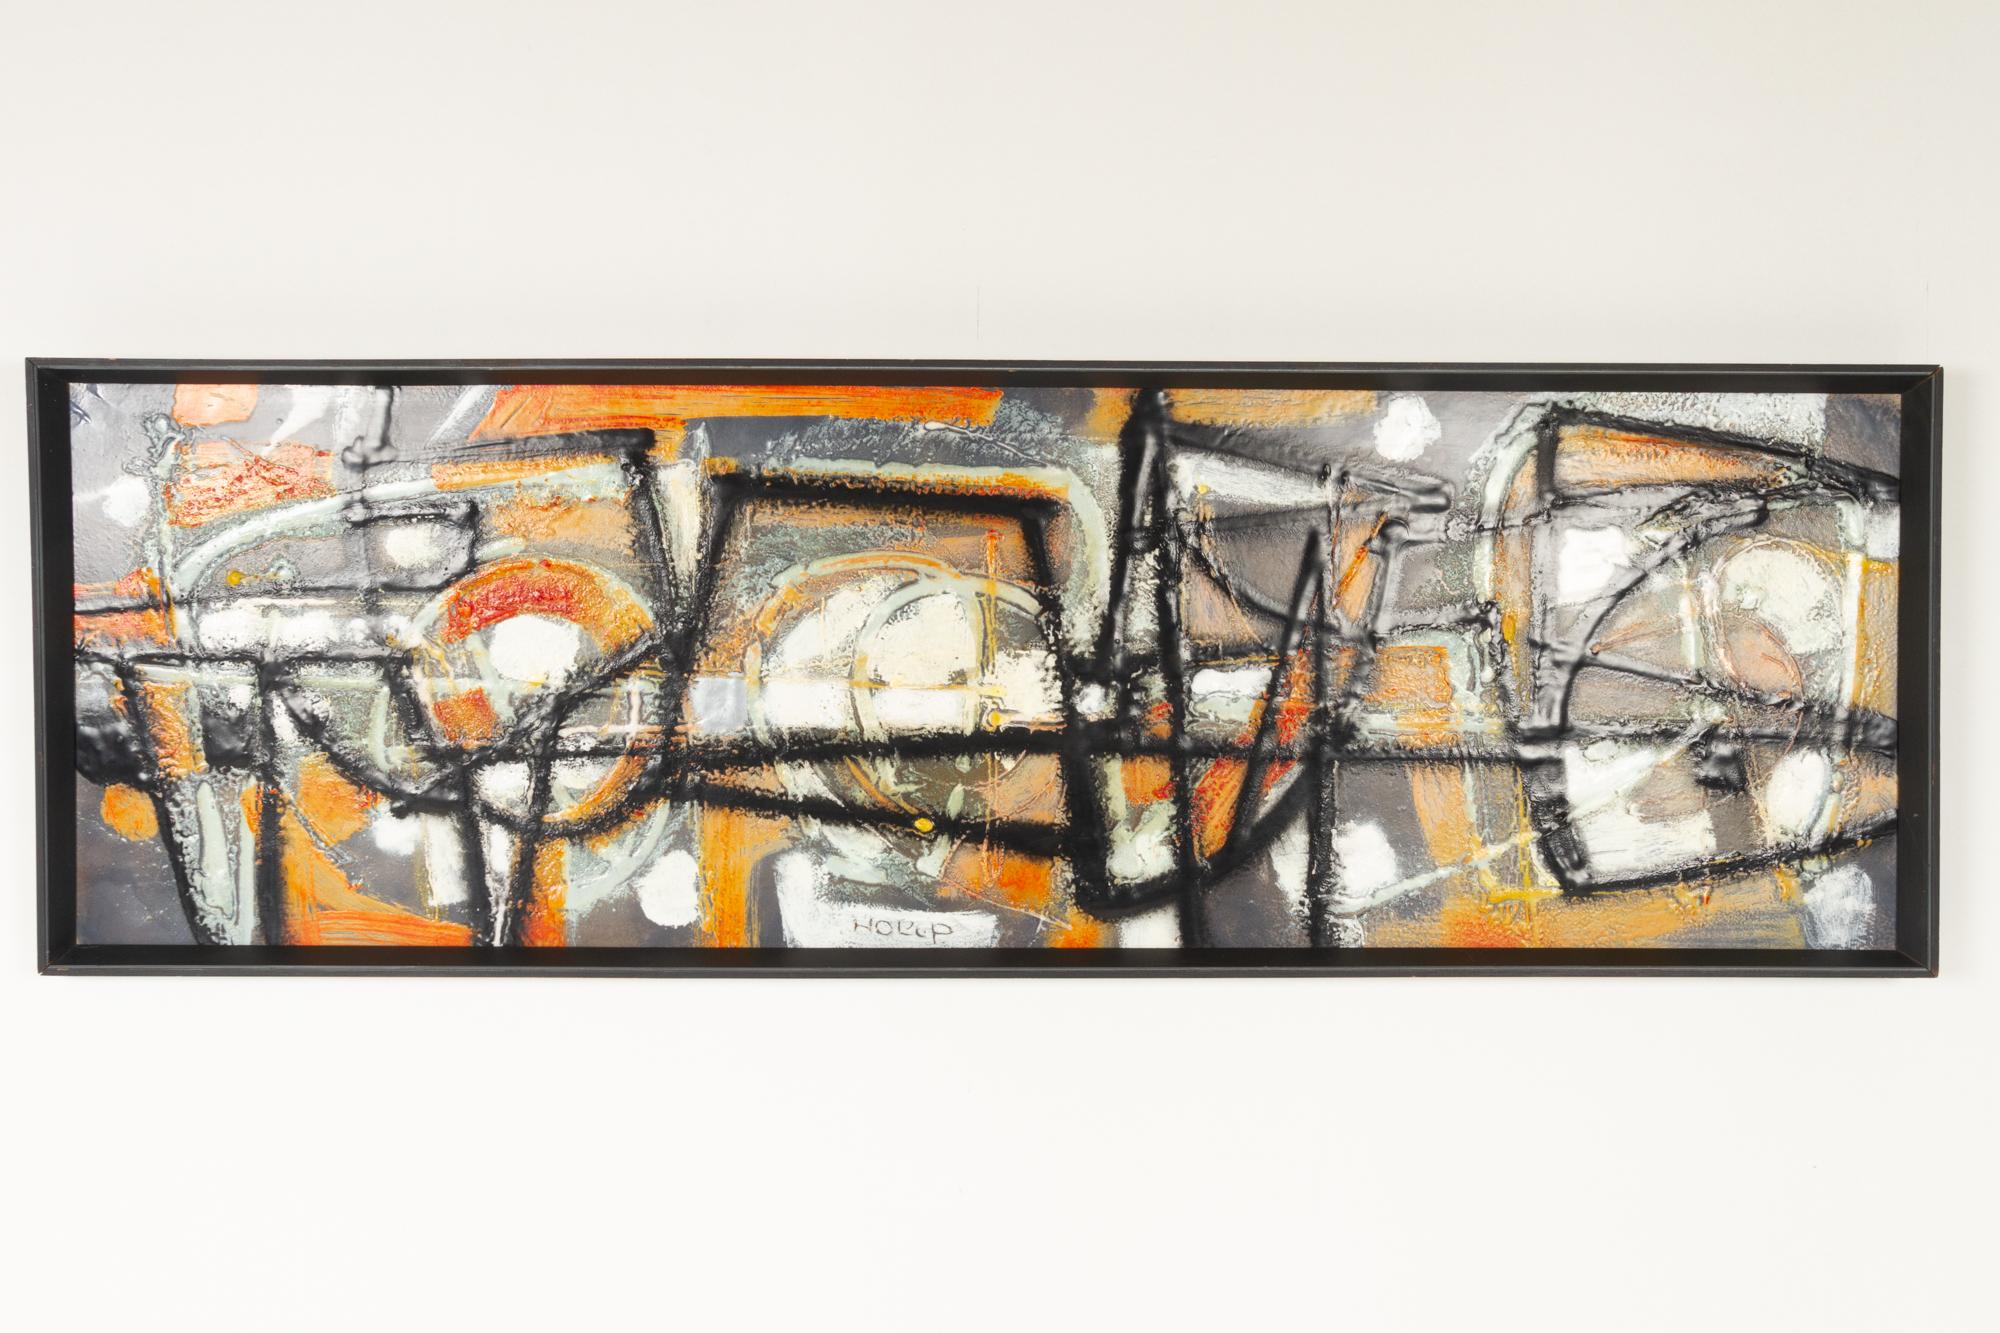 Mid-20th Century Danish Abstract Composition in Enamel on Metal by Knud Horup, 1950s